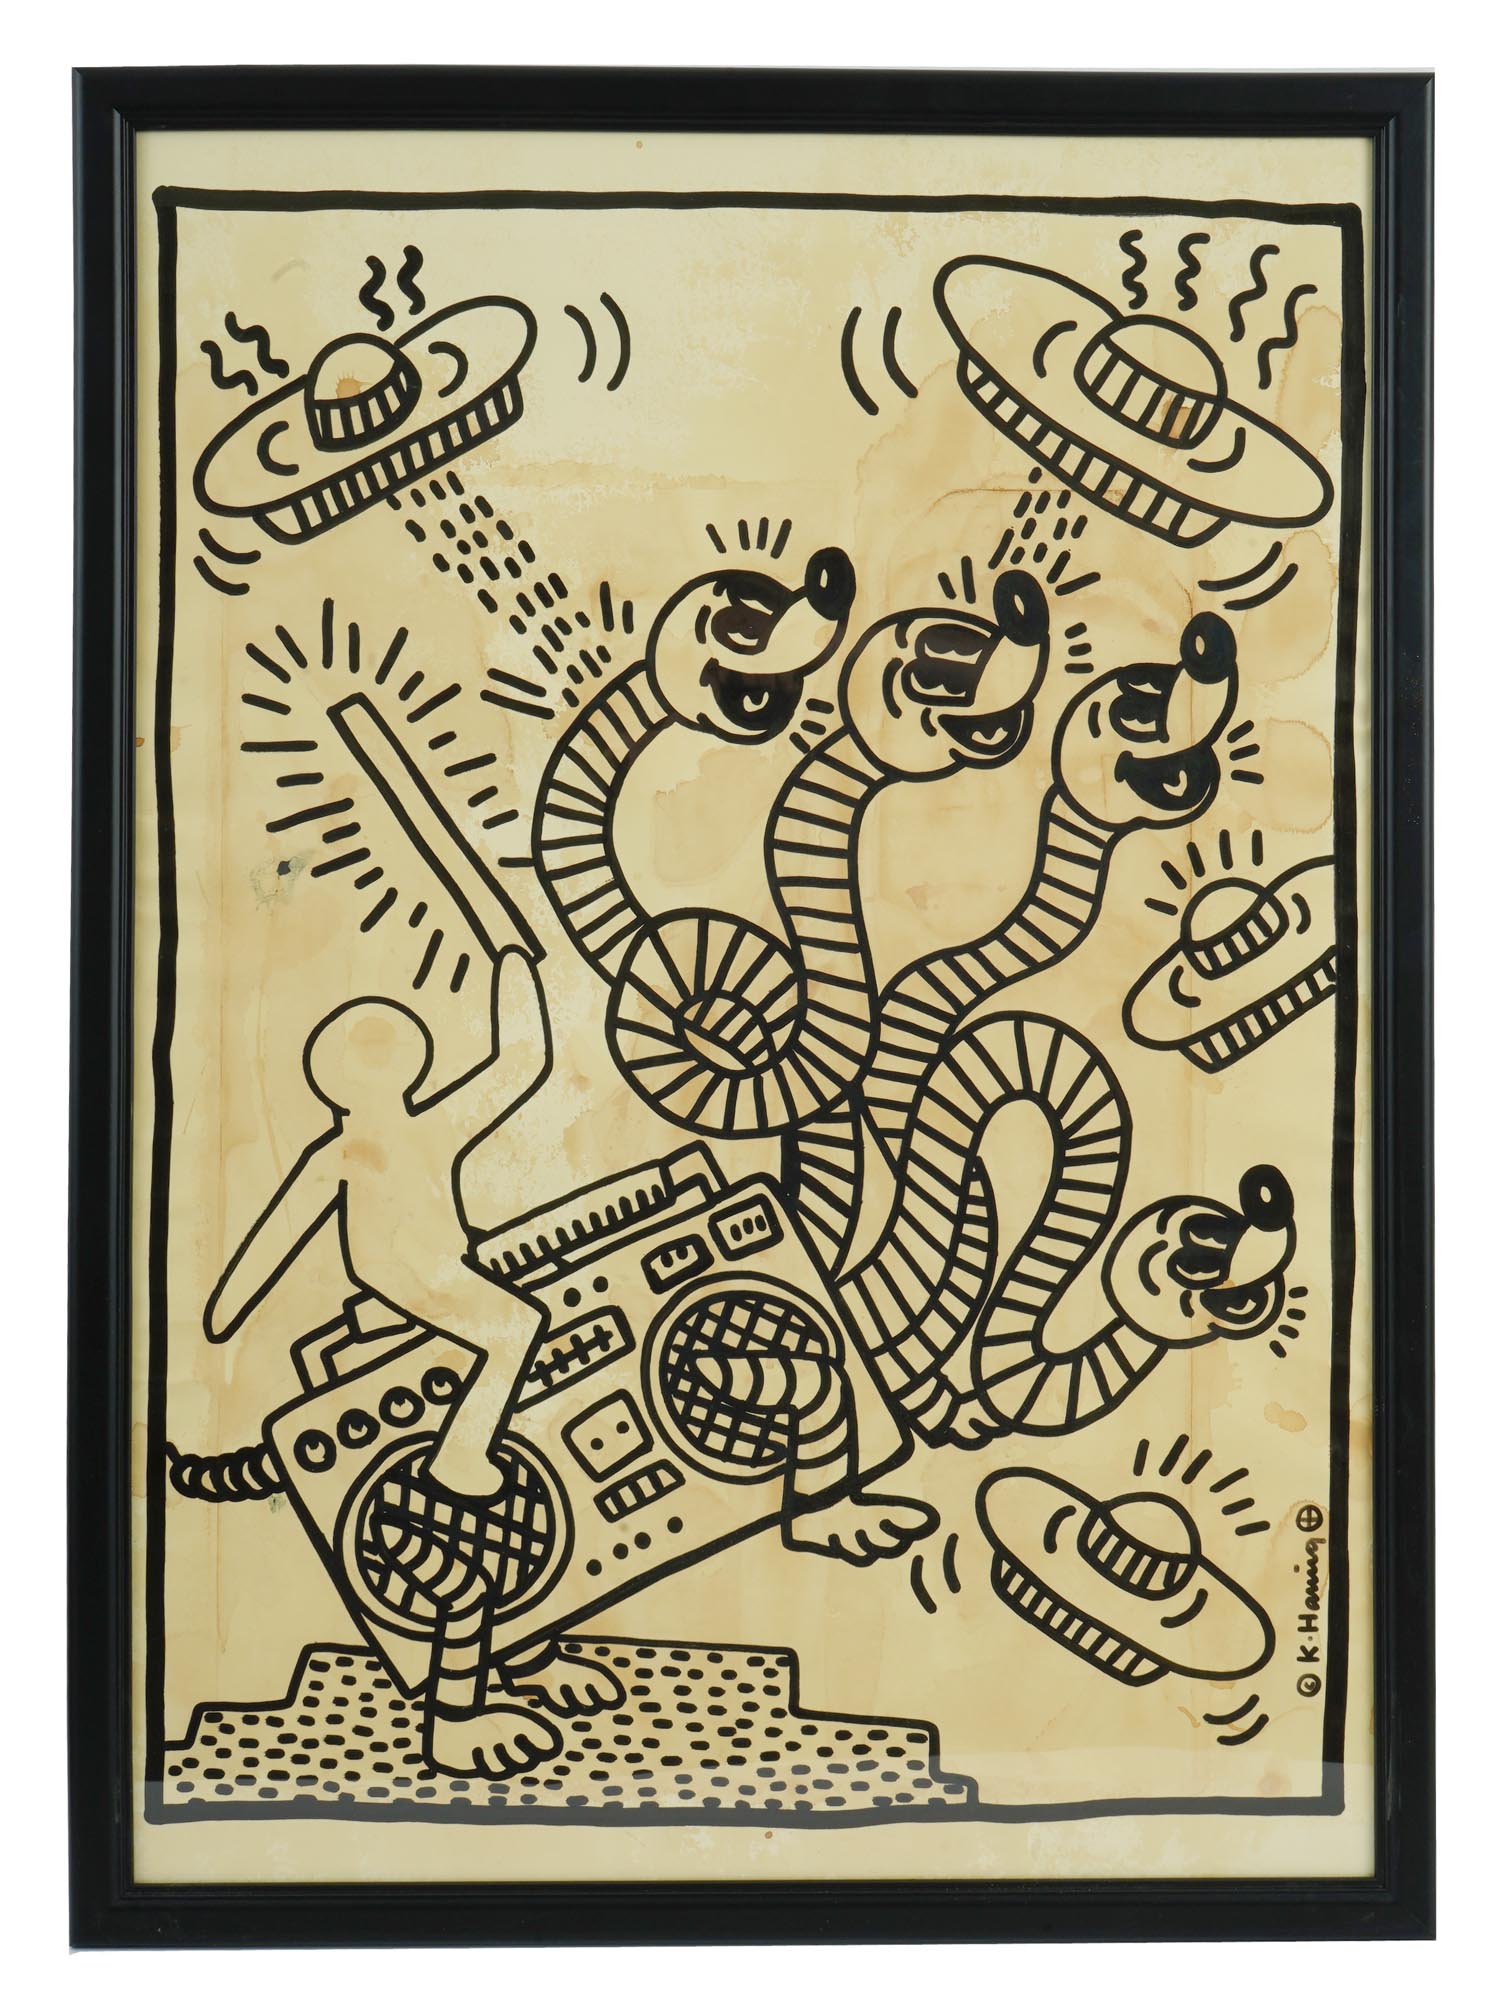 CONTEMPORARY AMERICAN DRAWING BY KEITH HARING FRAMED